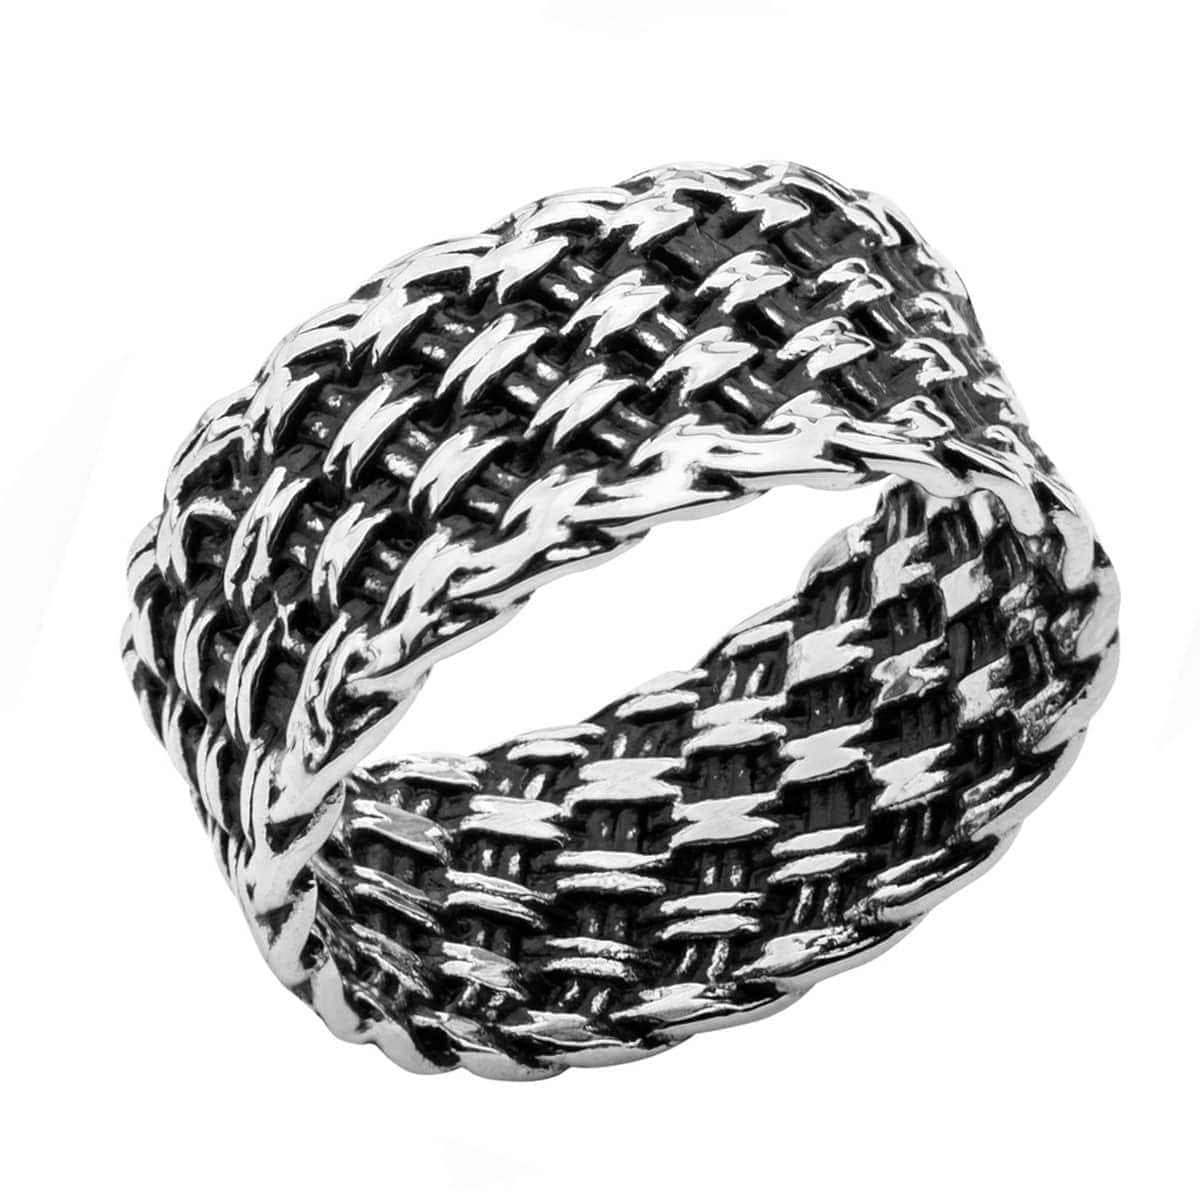 INOX JEWELRY Rings Antiqued Silver Tone Stainless Steel Cross-Weave Woven Pattern Ring